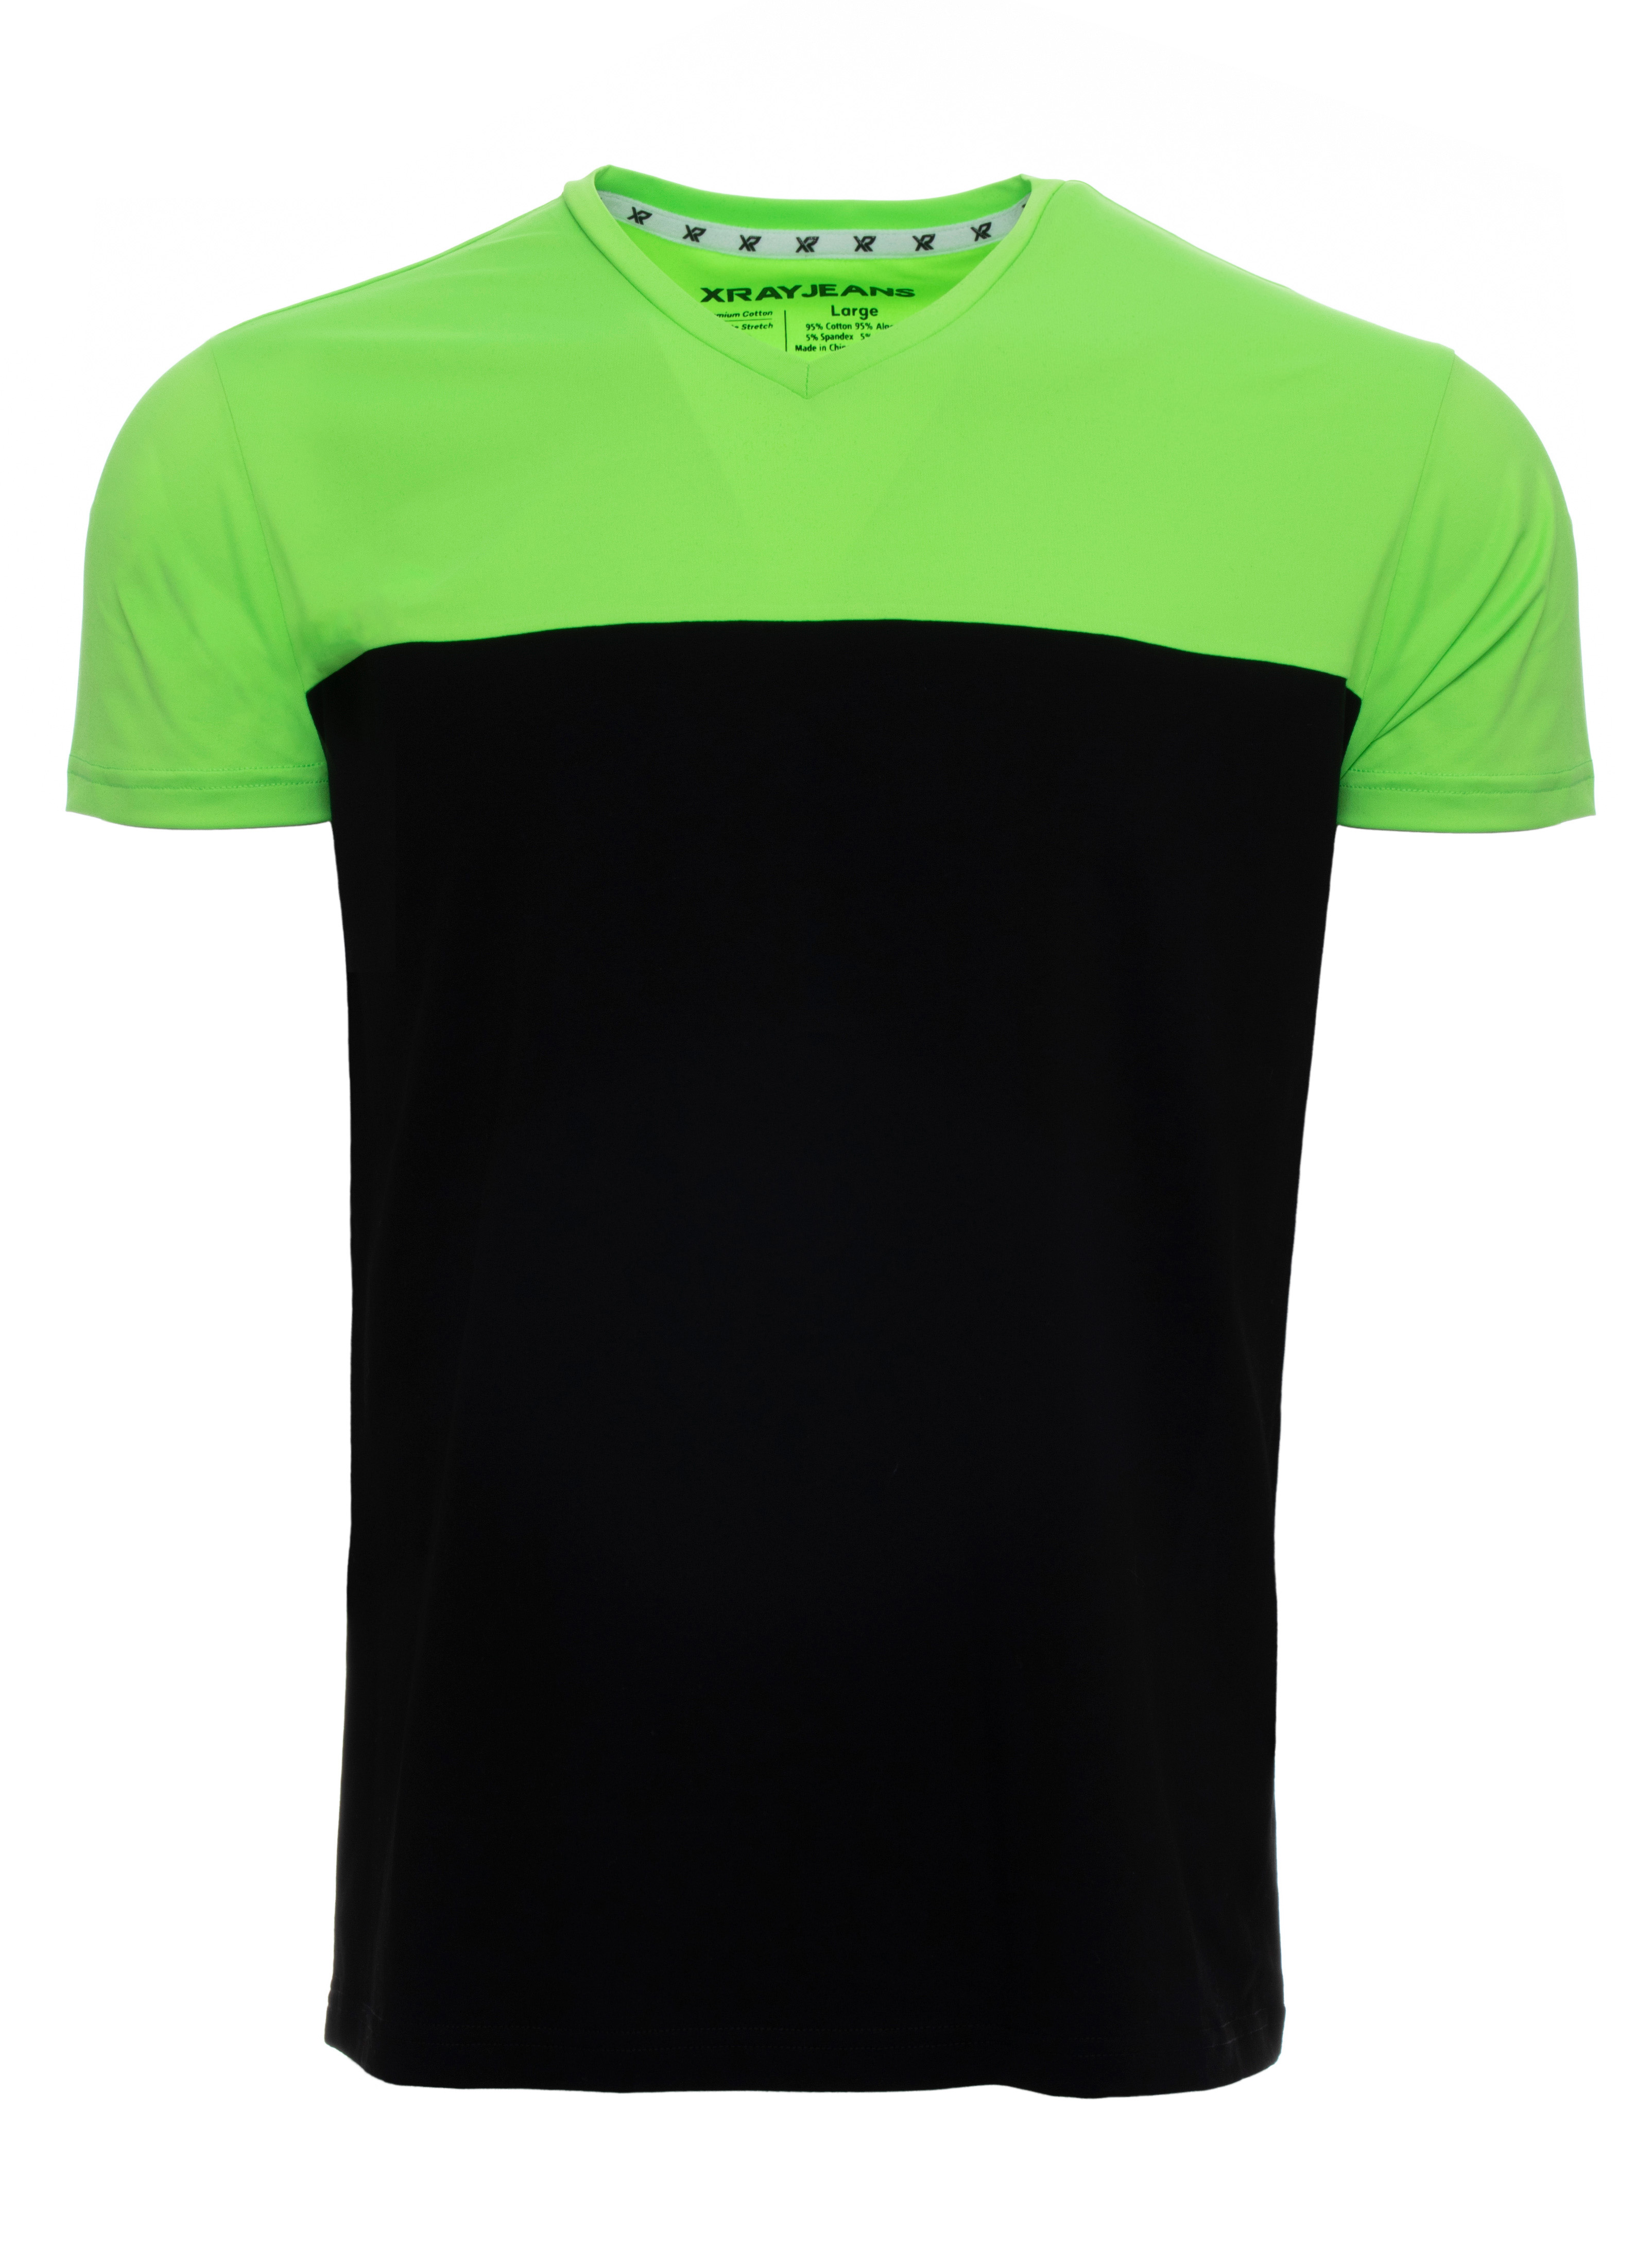 X RAY Men's Soft Stretch Cotton Solid Colorblock Short Sleeve V-Neck Slim Fit T-Shirt, Fashion Sport Casual Tee for Men, Black/Neon Green Size Large - image 1 of 4